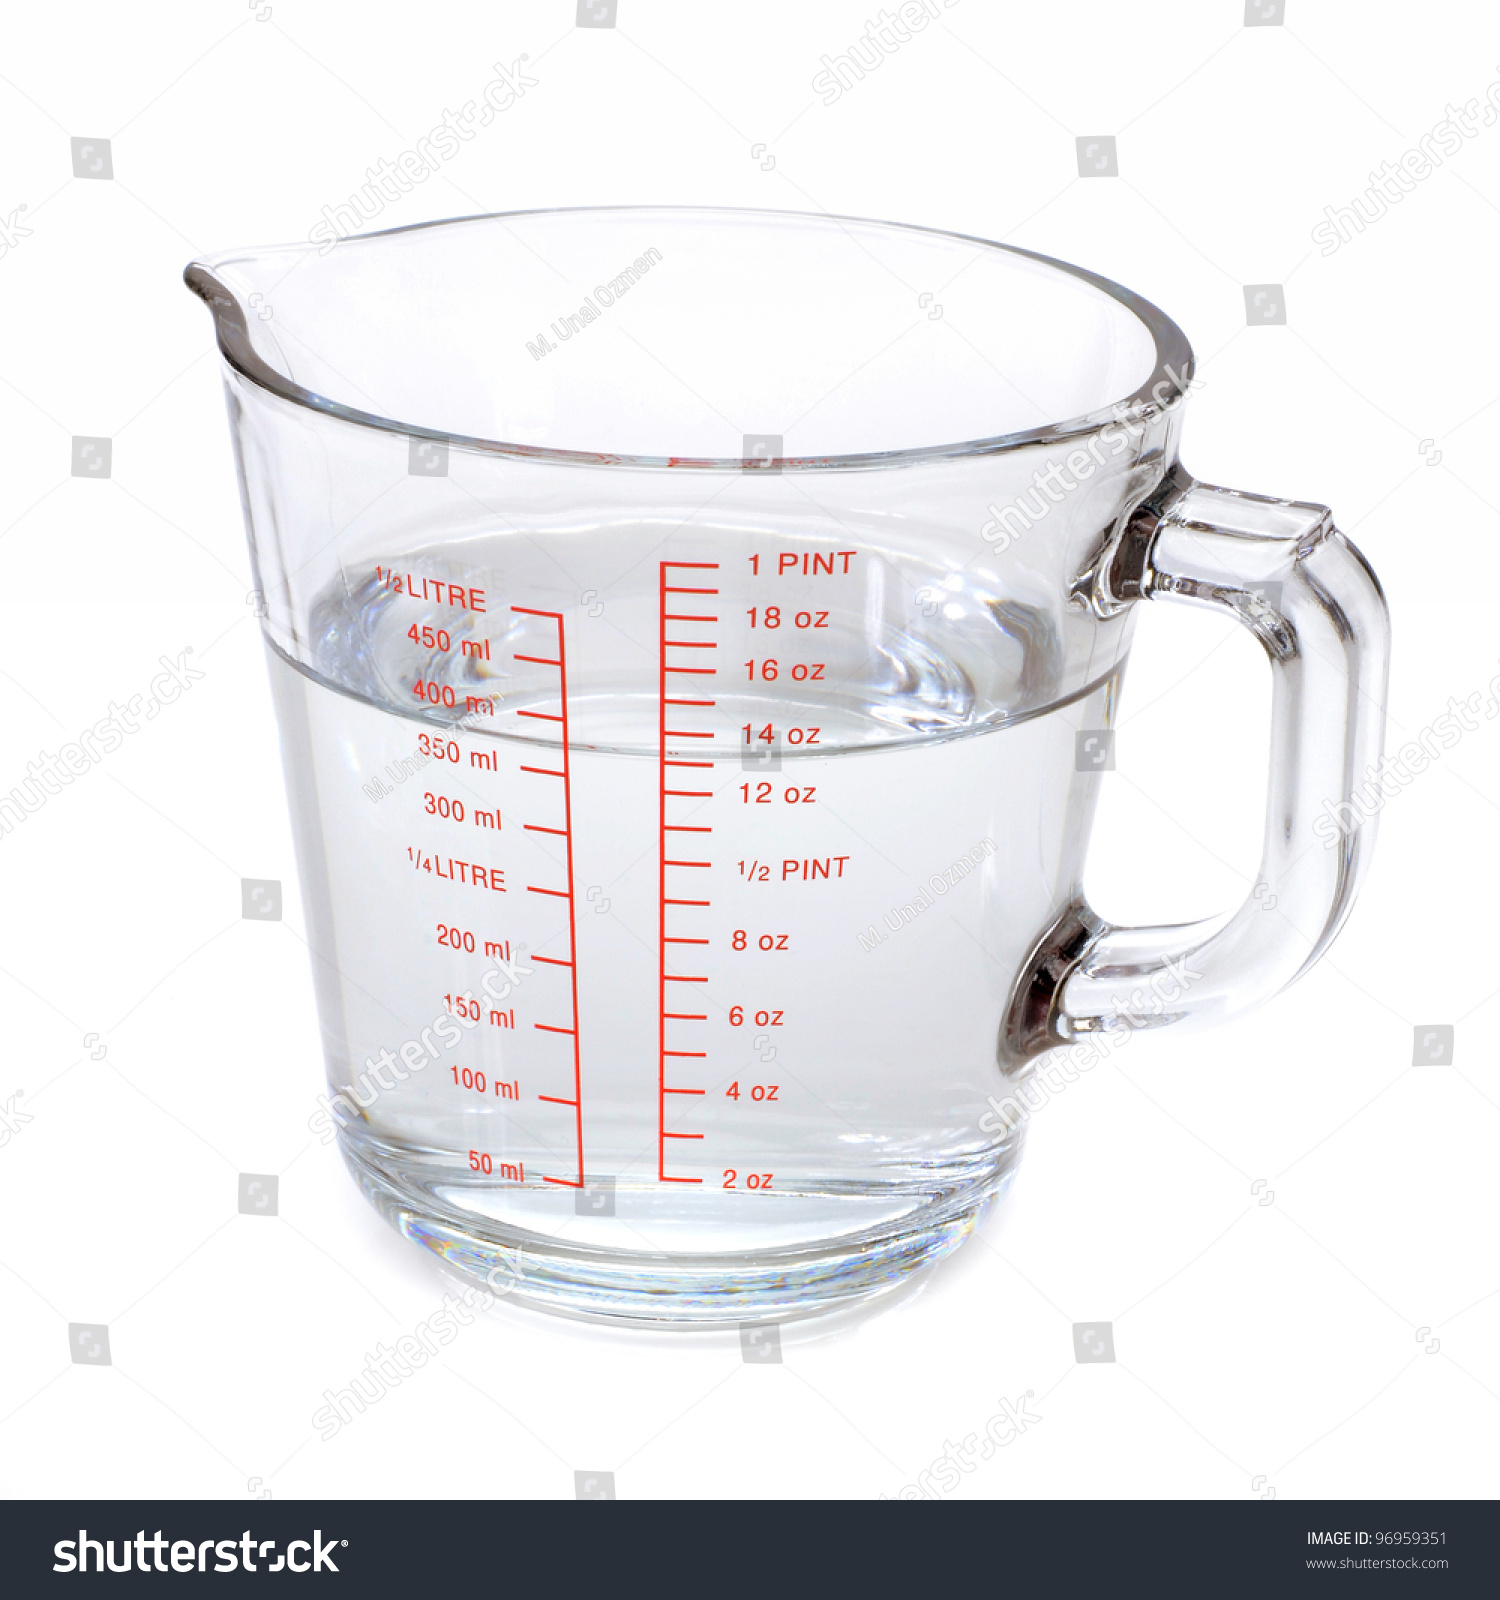 Water Measuring Cup Isolated On White Food And Drink Stock Image 96959351,Tri Tip Roast Slow Cooker